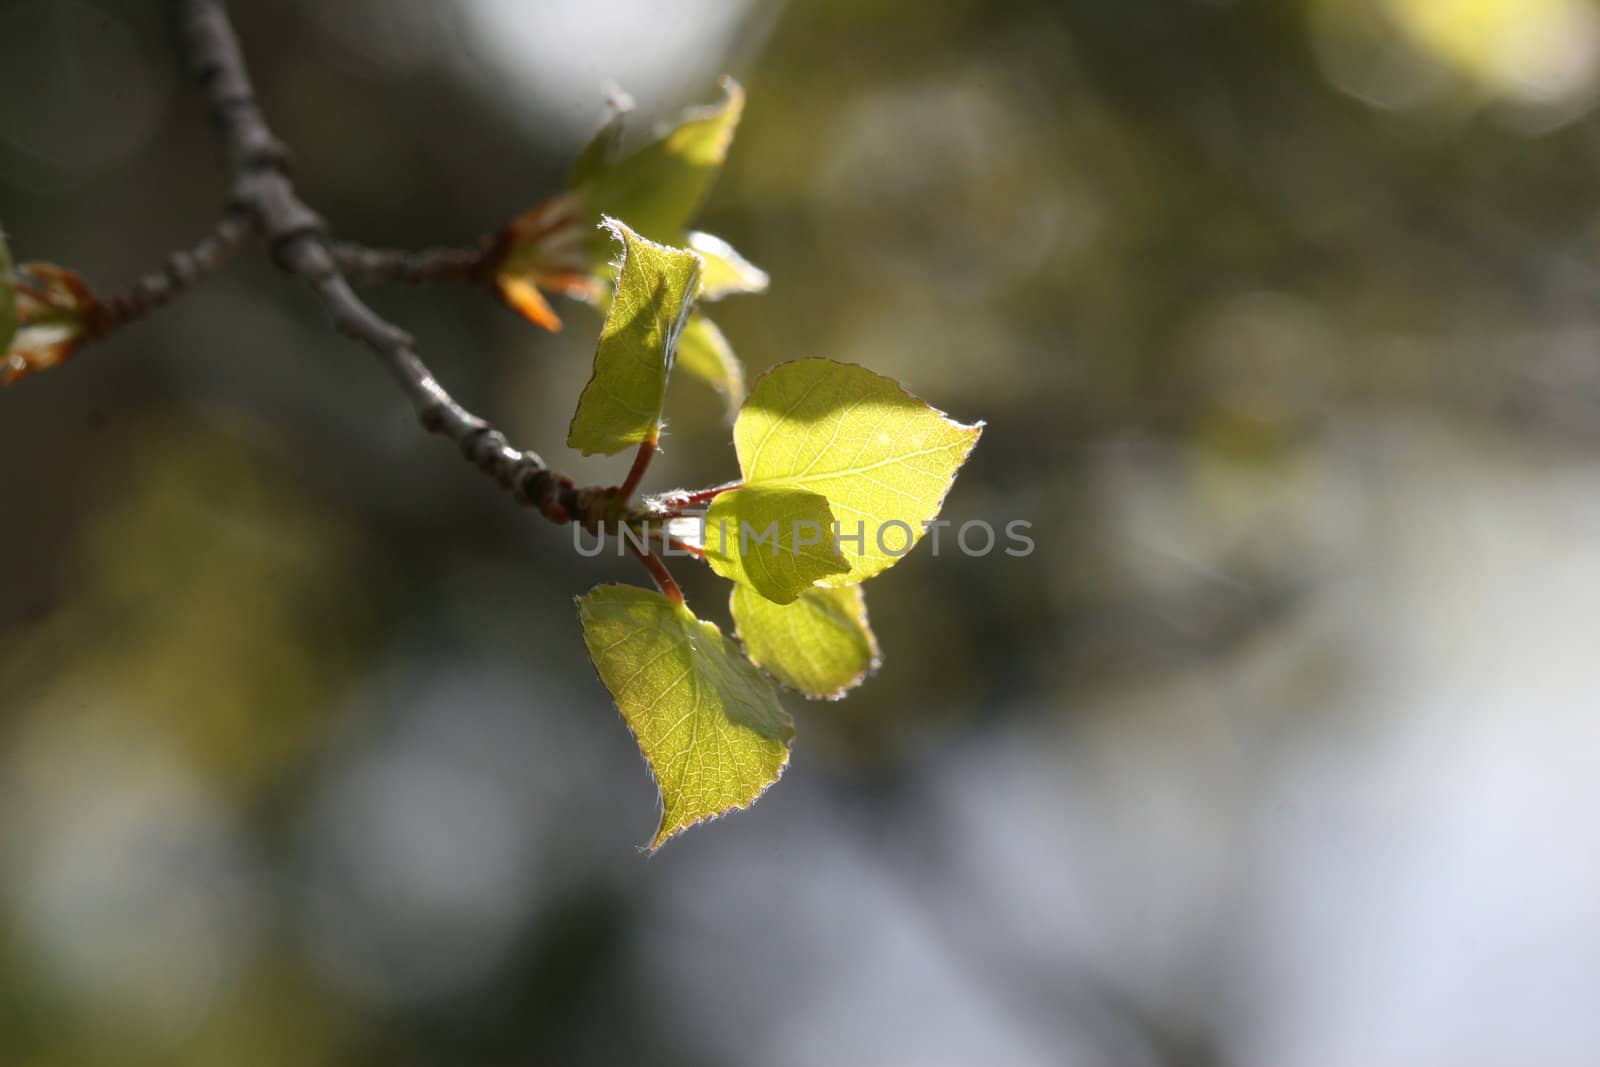 Aspen leaves show new growth in the spring